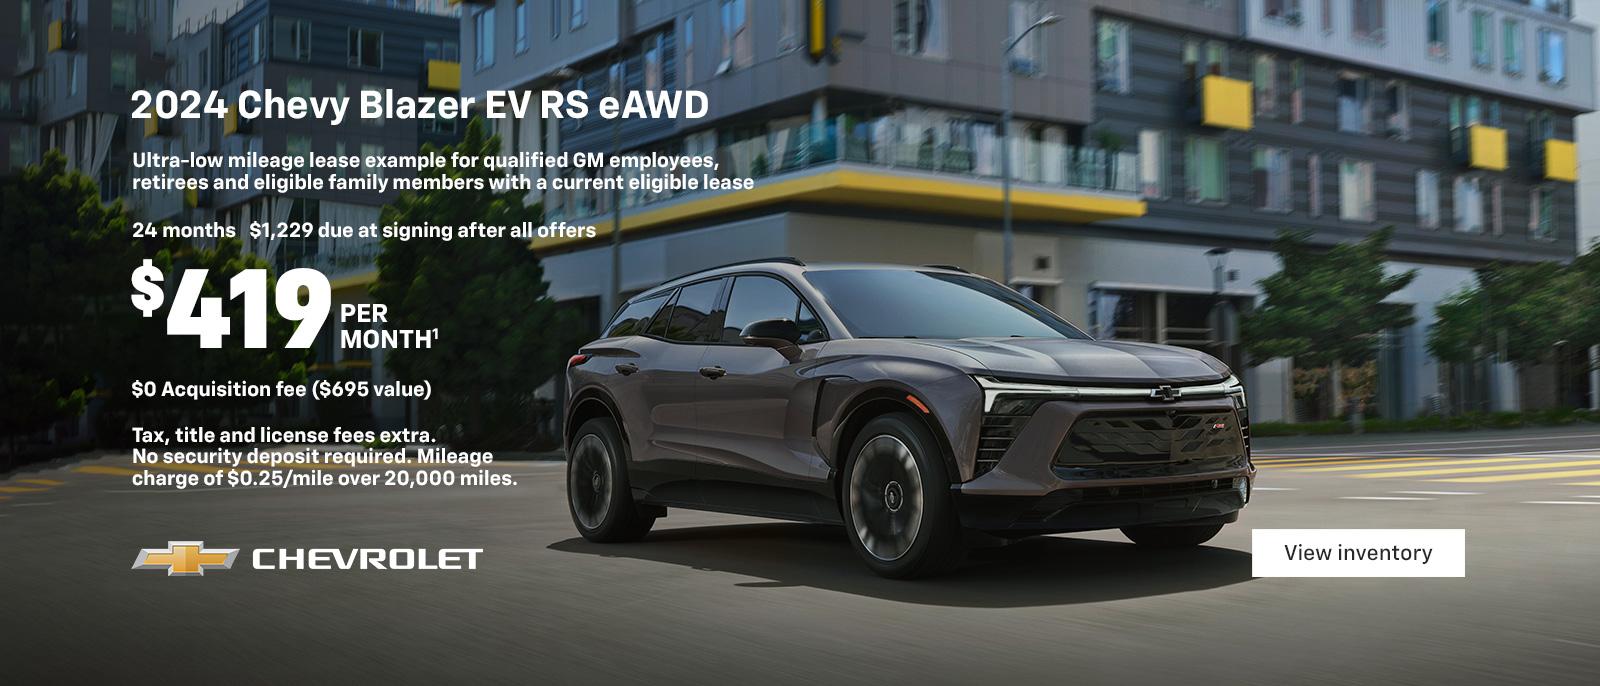 2024 Chevy Blazer EV RS. 2024 MotorTend SUV of the Year. The first-ever, all-electric Blazer EV. Ultra-low mileage lease example for qualified GM employees, retirees and eligible family members with a current eligible lease. $419 per month. 24 months. $1,229 due at signing after all offers. $0 Acquisition fees ($695 value). Tax, title and license fees extra. No security deposit required. Mileage charge of $0.25/mile over 20,000 miles.